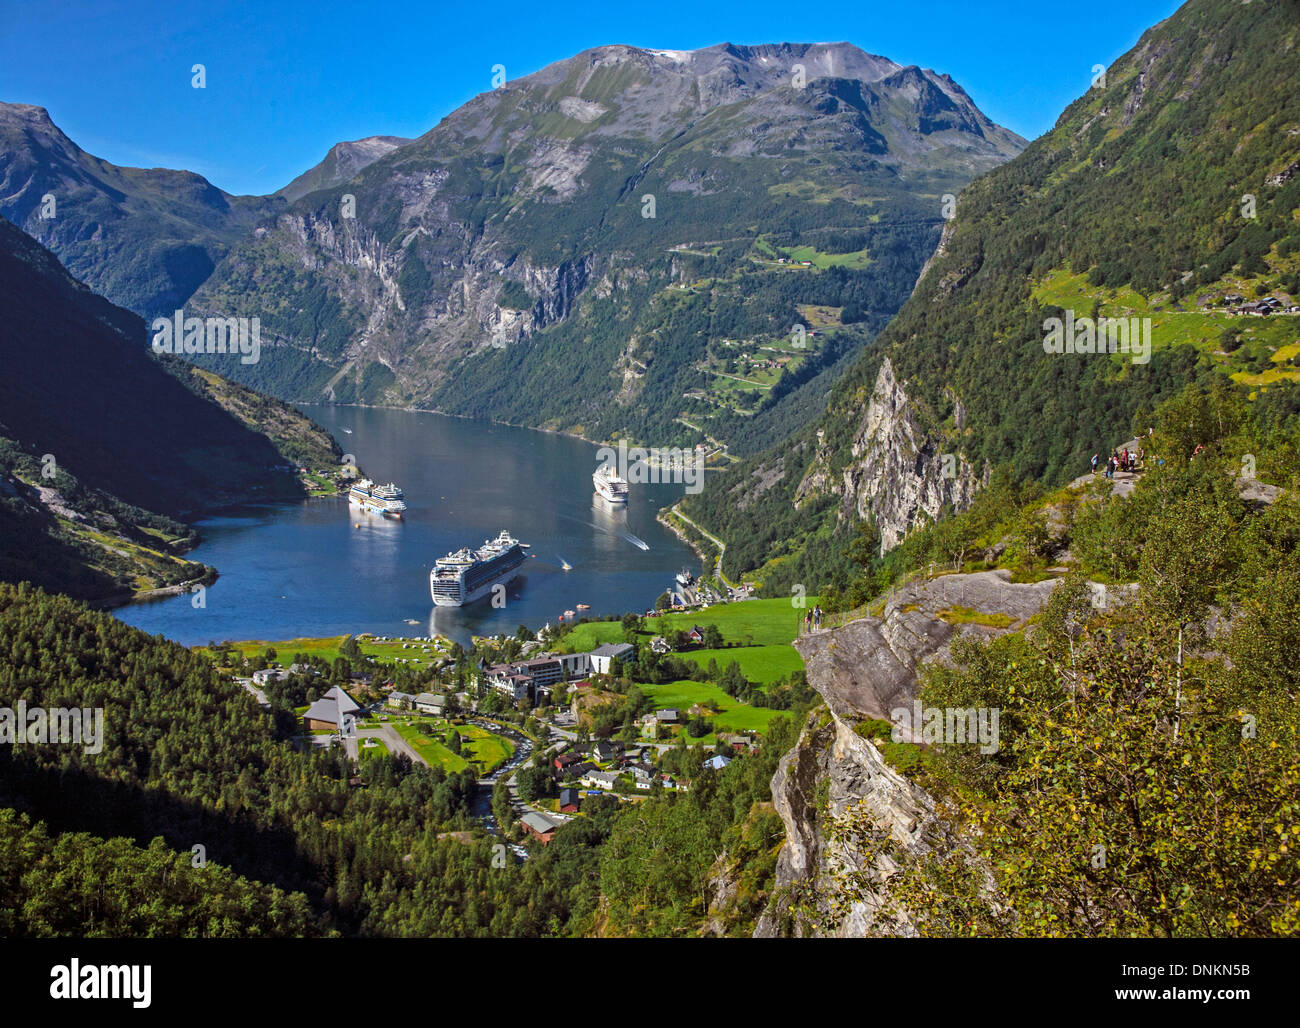 View of Geiranger village and Geirangerfjord from Mount Dalsnibba showing cruise ships, Norway, Scandinavia, Europe Stock Photo